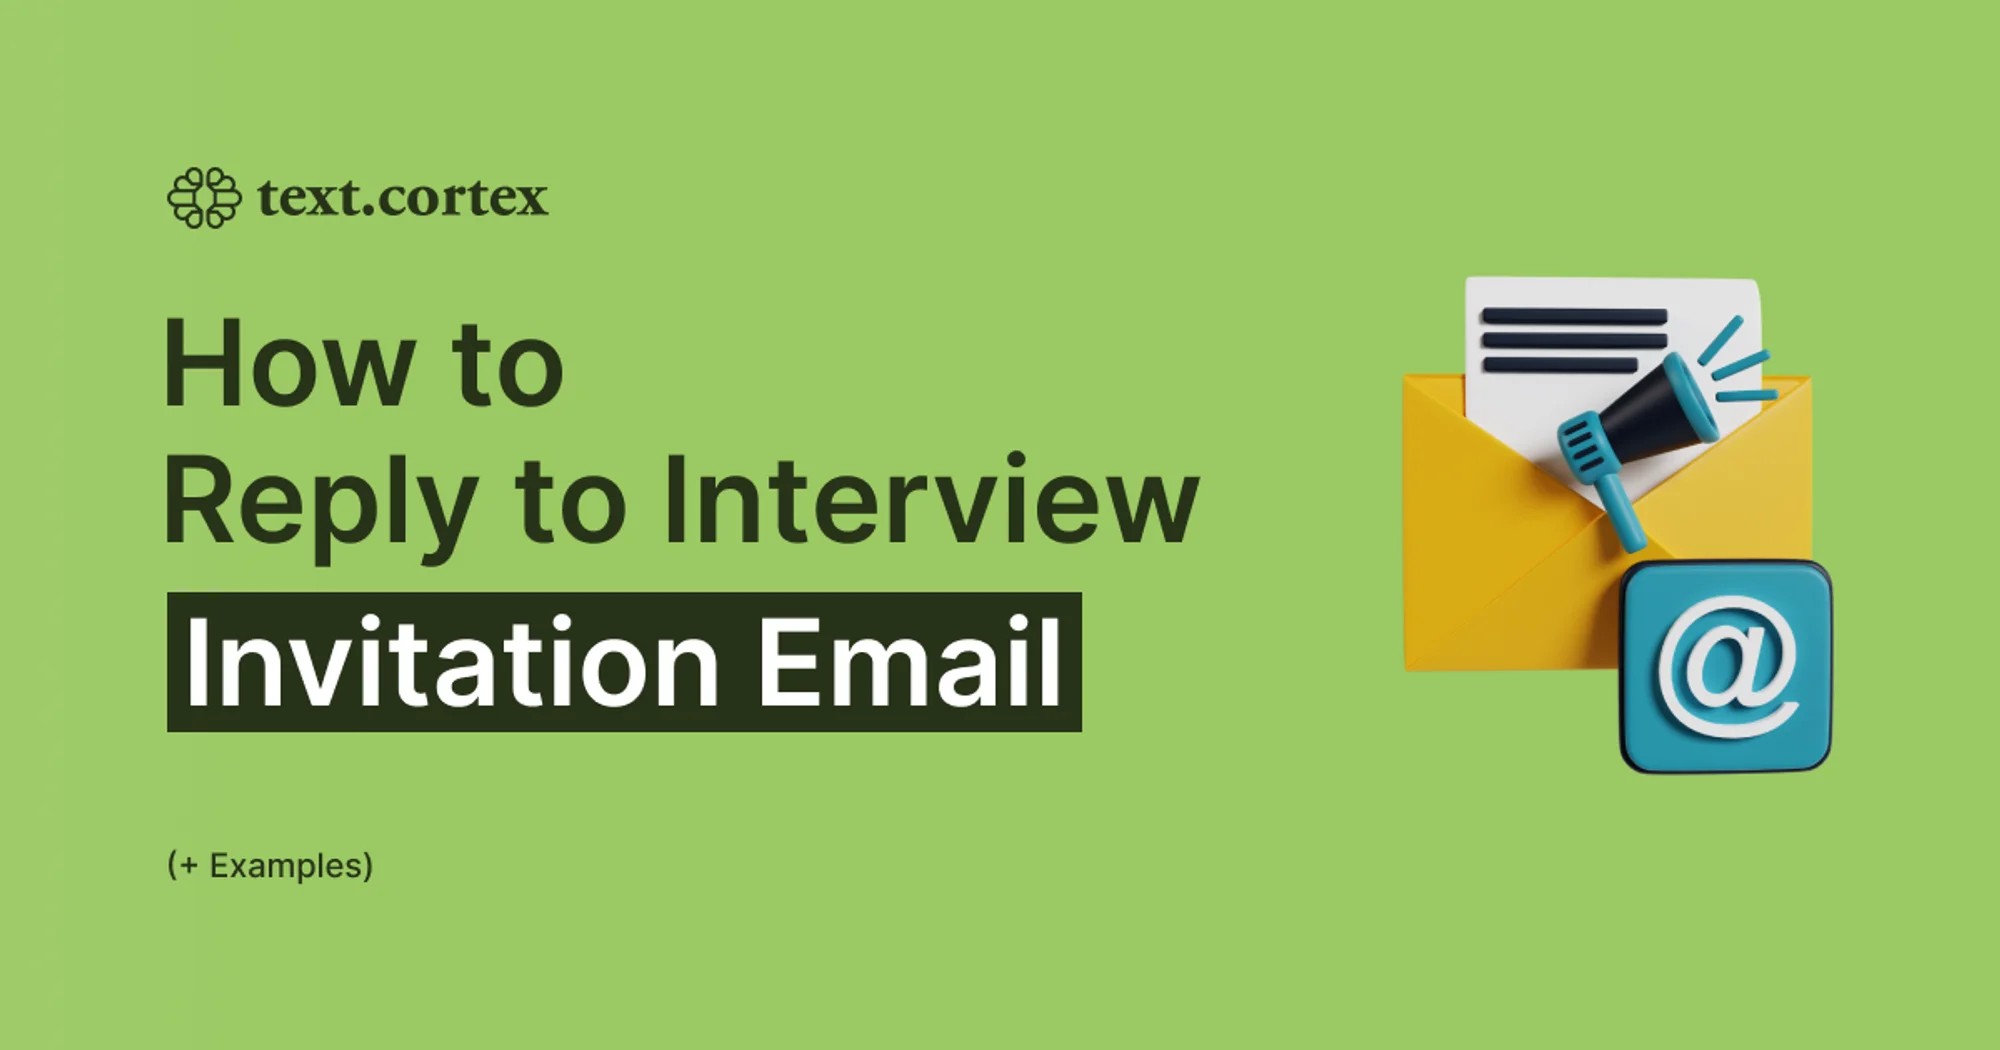 How to Reply to Interview Invitation Email (+Examples)